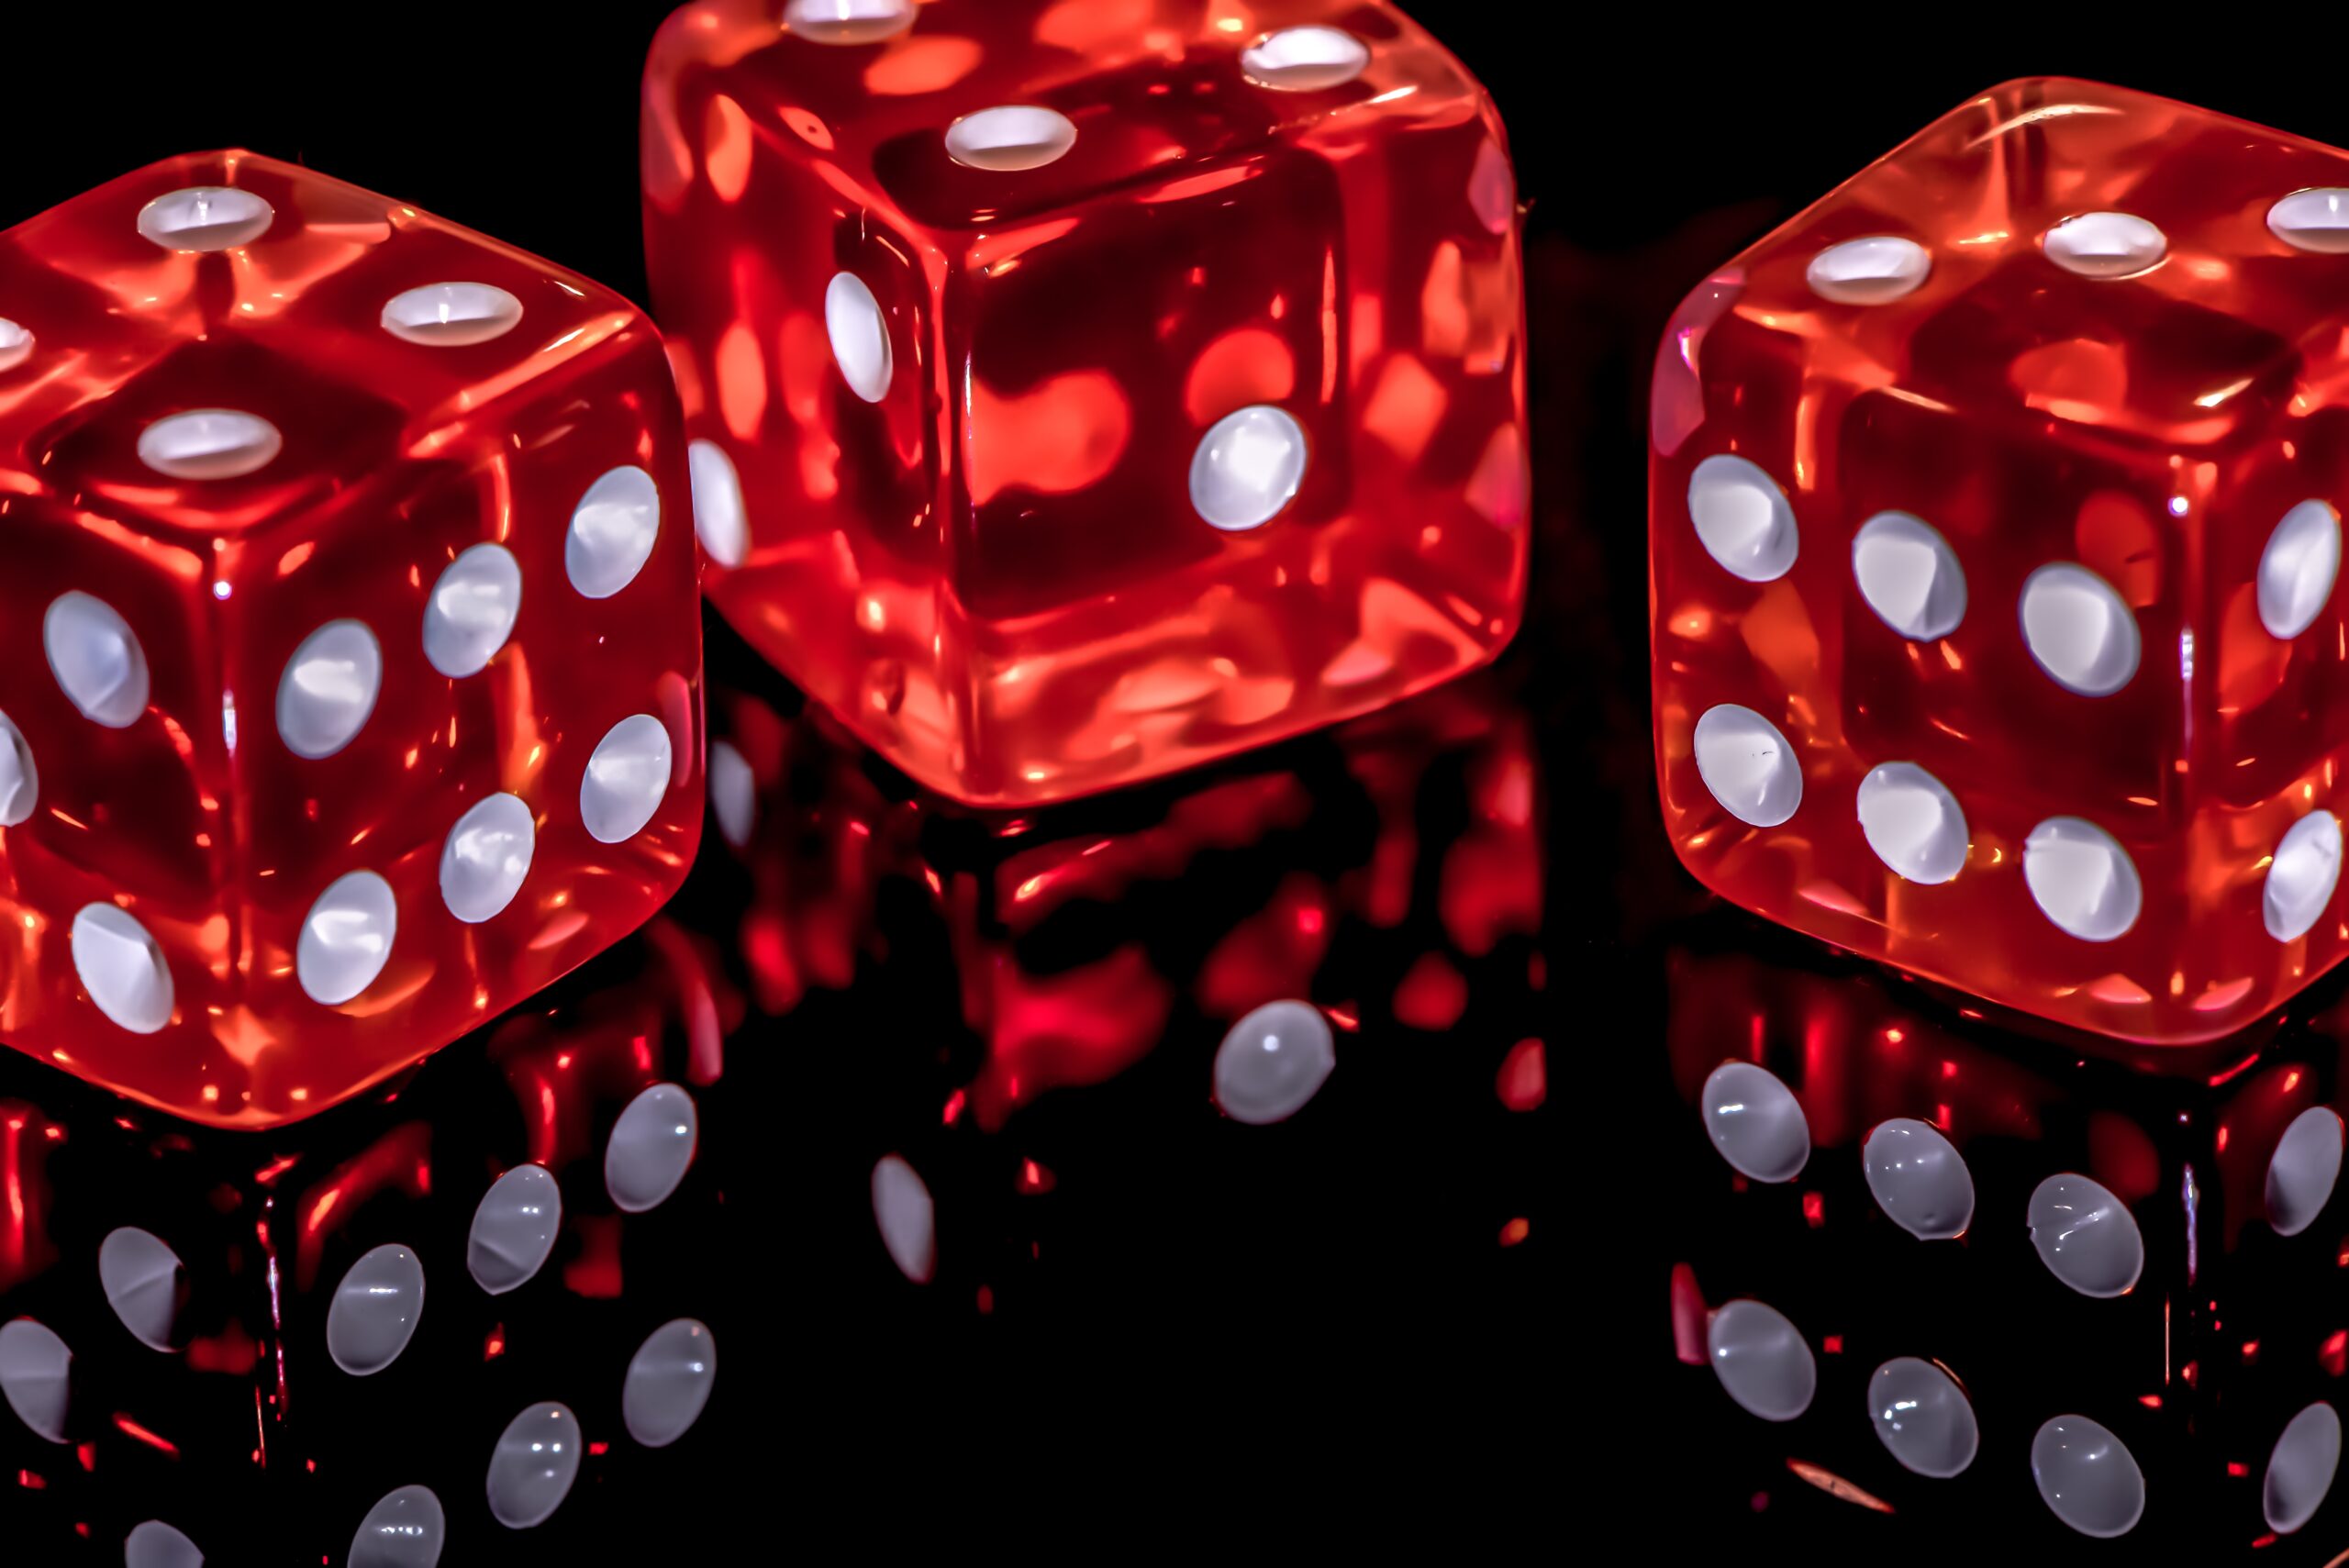 Photograph of three large red translucent dice against a black background.